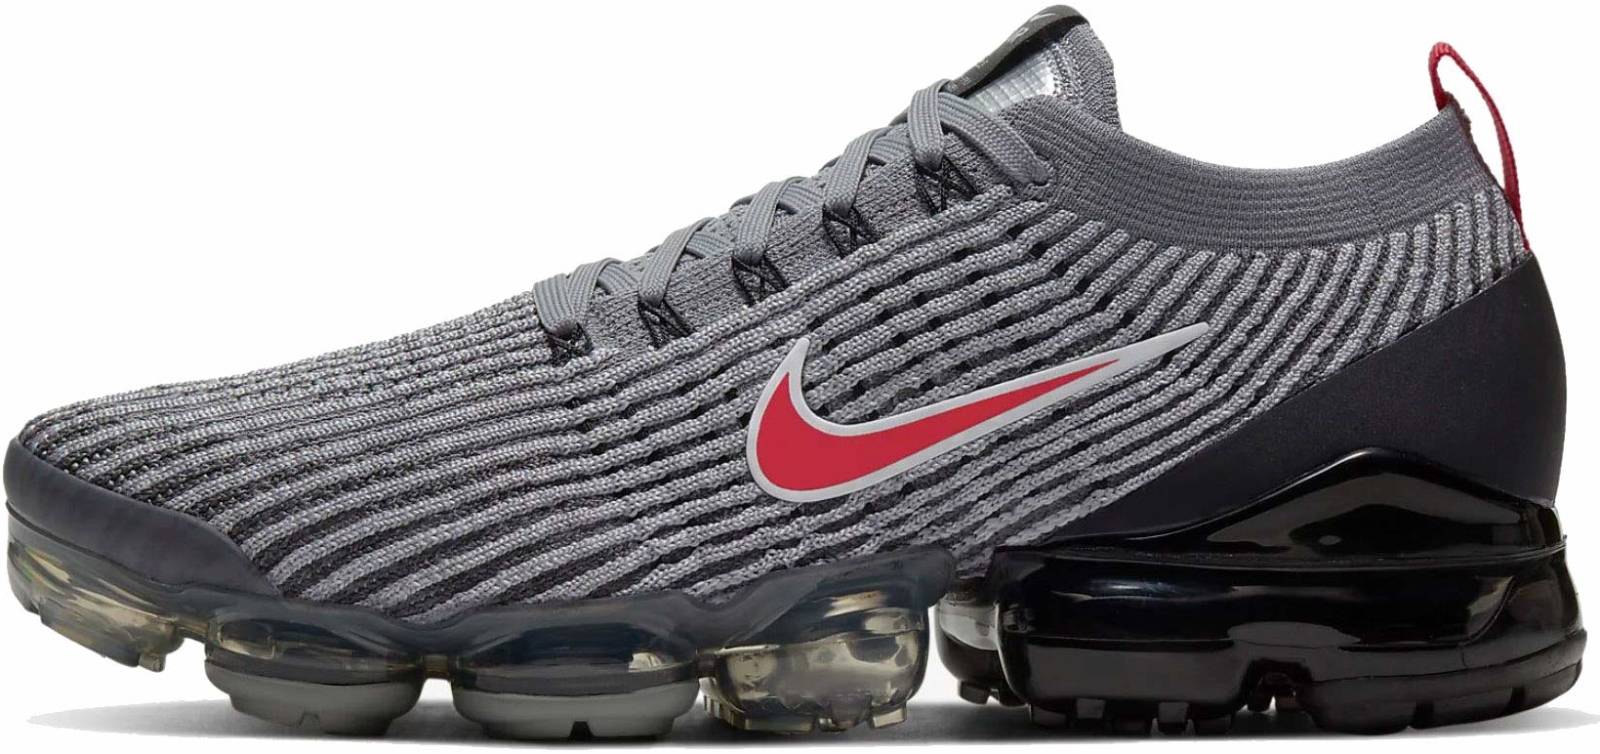 Save 26% on Nike VaporMax Sneakers (13 